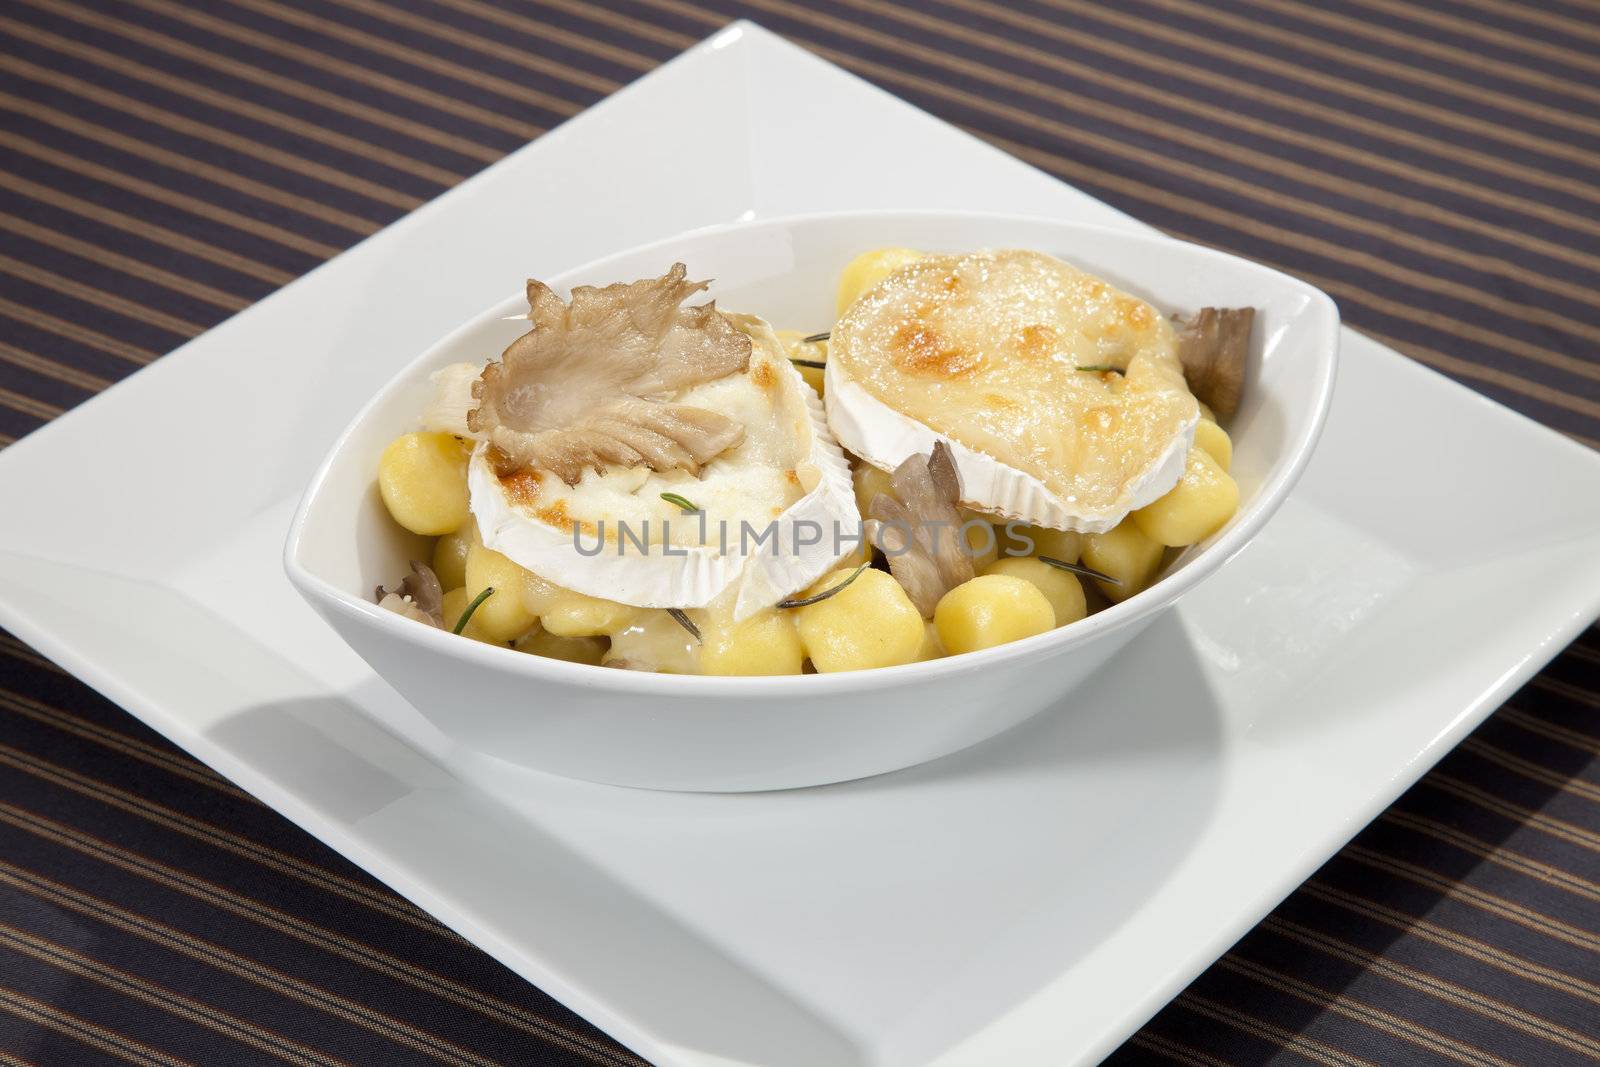 Grilled camembert cheese with the italian dumplings and mushrooms